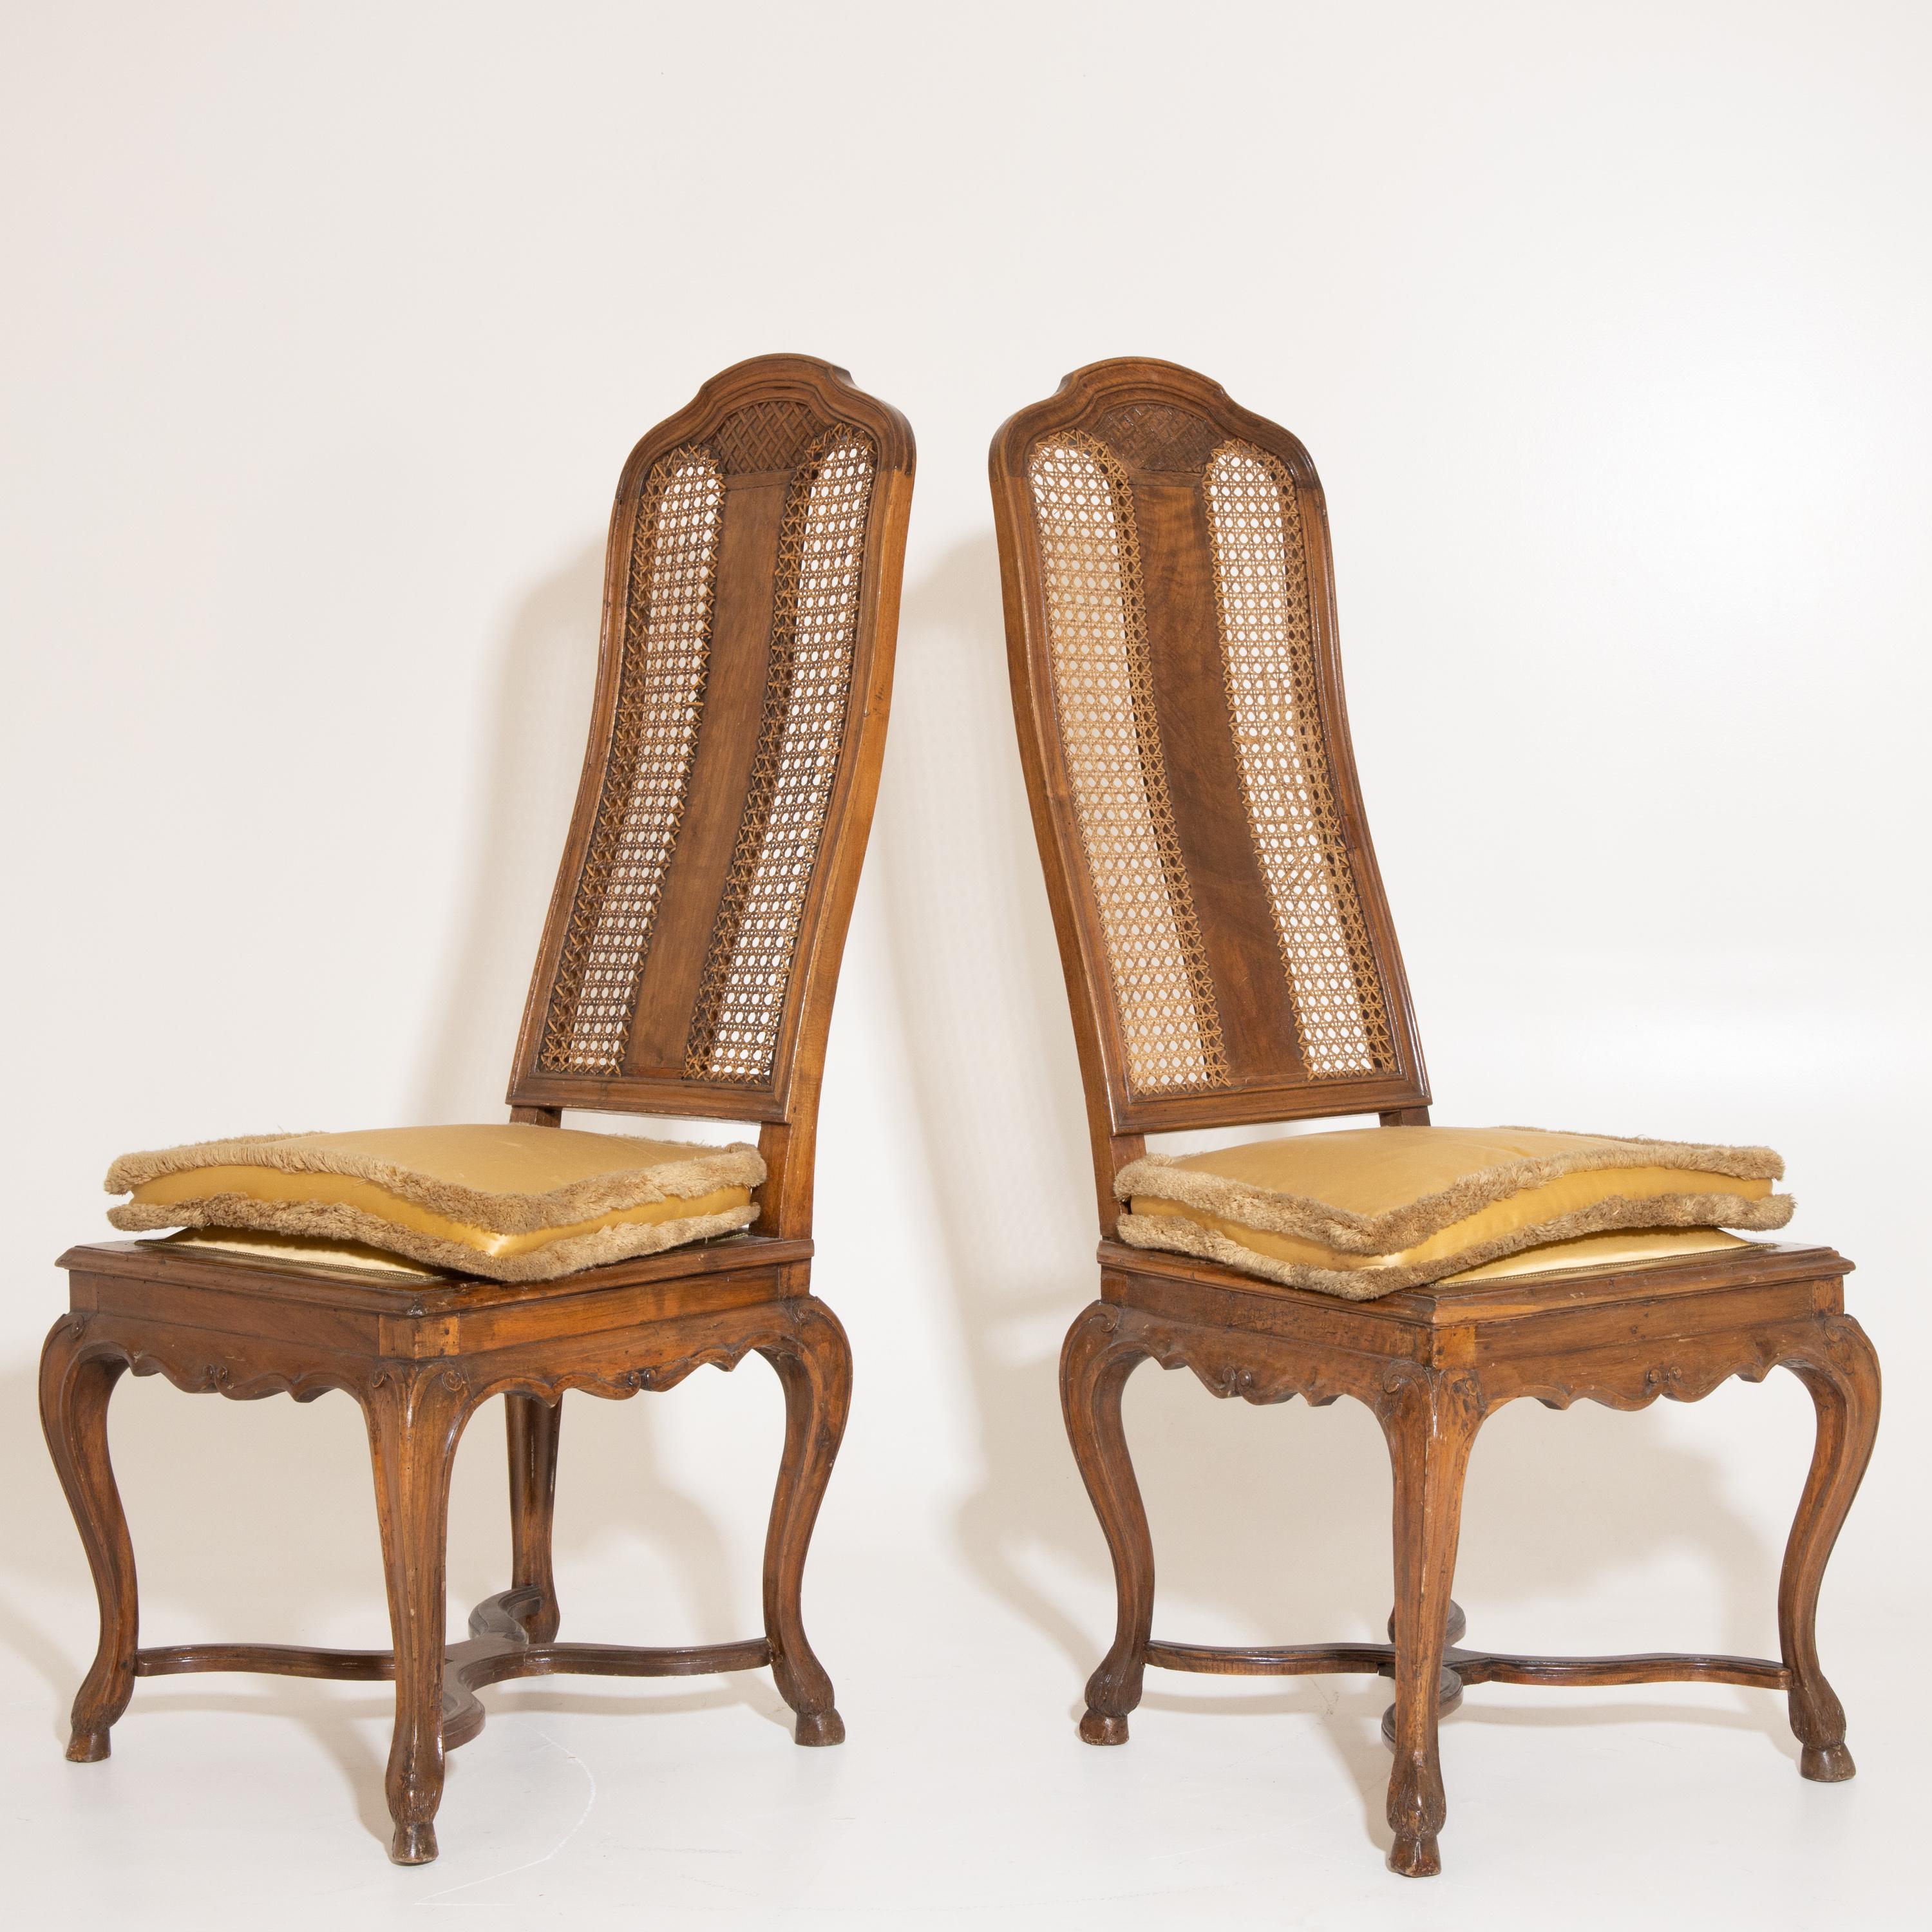 The pair of tongue chairs have a trapezoidal seat. The backrest is mouloured and covered with a jonce weave. Literature: Sotheby's, The Collection of the Margraves and Grand Dukes of Baden, Auction Baden-Baden 5. to 21. October 1995, p. 10, Tf. II,